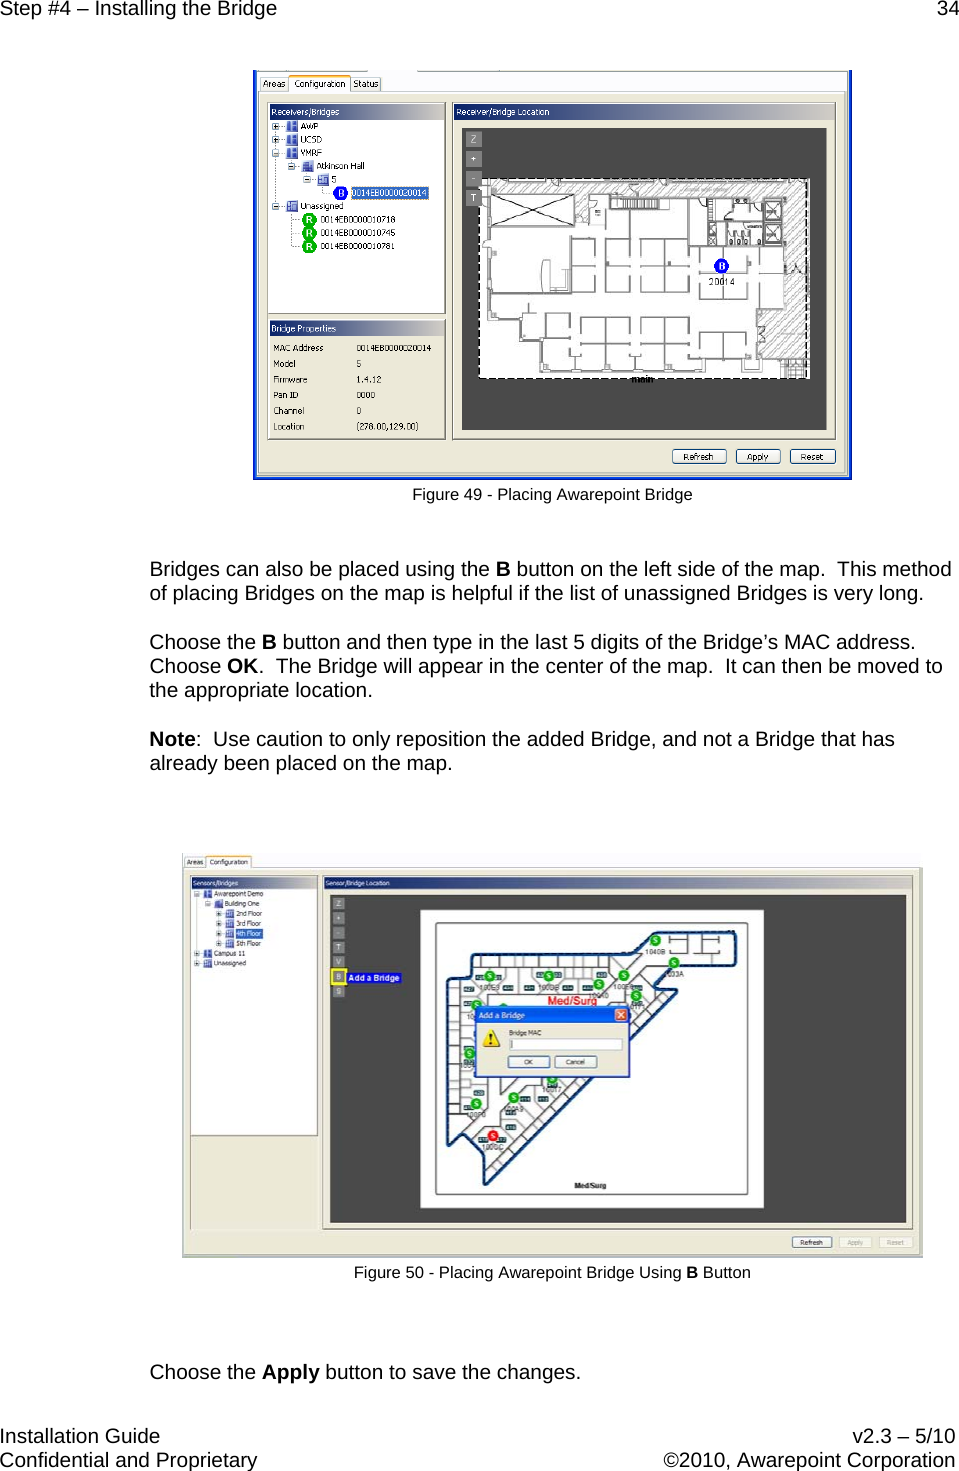 Step #4 – Installing the Bridge    34   Installation Guide    v2.3 – 5/10 Confidential and Proprietary    ©2010, Awarepoint Corporation   Figure 49 - Placing Awarepoint Bridge  Bridges can also be placed using the B button on the left side of the map.  This method of placing Bridges on the map is helpful if the list of unassigned Bridges is very long.   Choose the B button and then type in the last 5 digits of the Bridge’s MAC address.  Choose OK.  The Bridge will appear in the center of the map.  It can then be moved to the appropriate location.   Note:  Use caution to only reposition the added Bridge, and not a Bridge that has already been placed on the map.    Figure 50 - Placing Awarepoint Bridge Using B Button  Choose the Apply button to save the changes. 